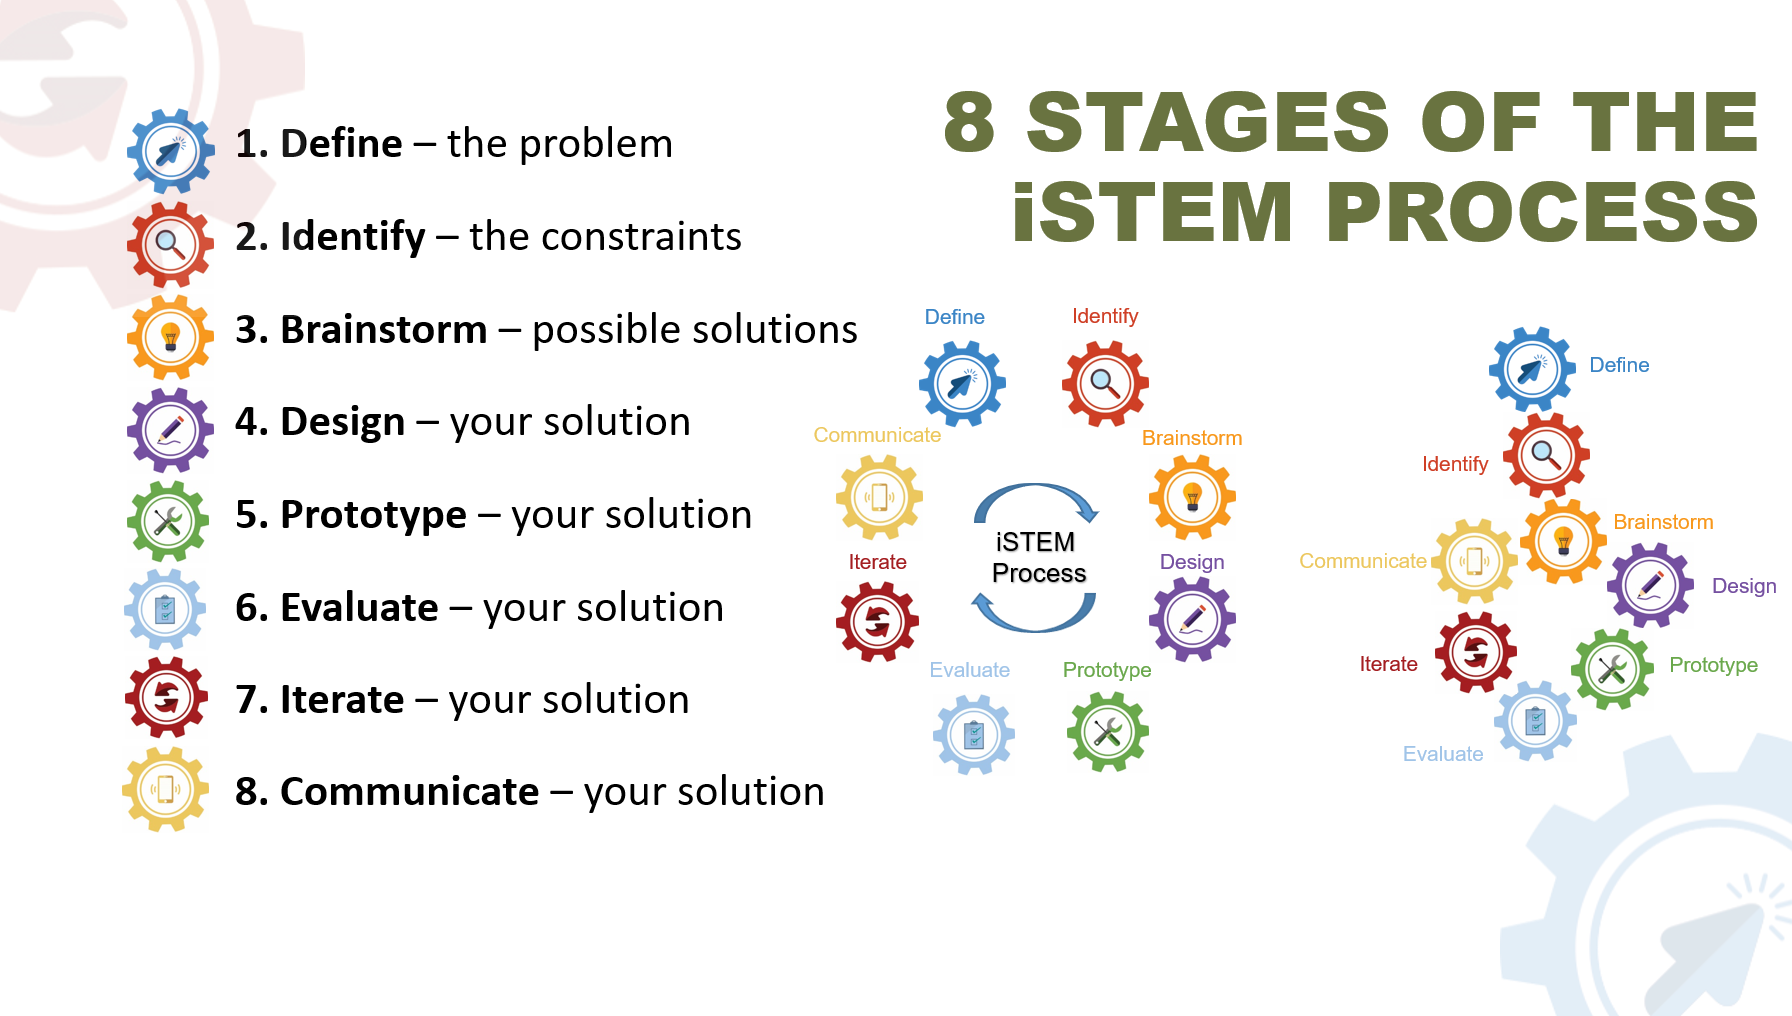 Stages of the iSTEM Process